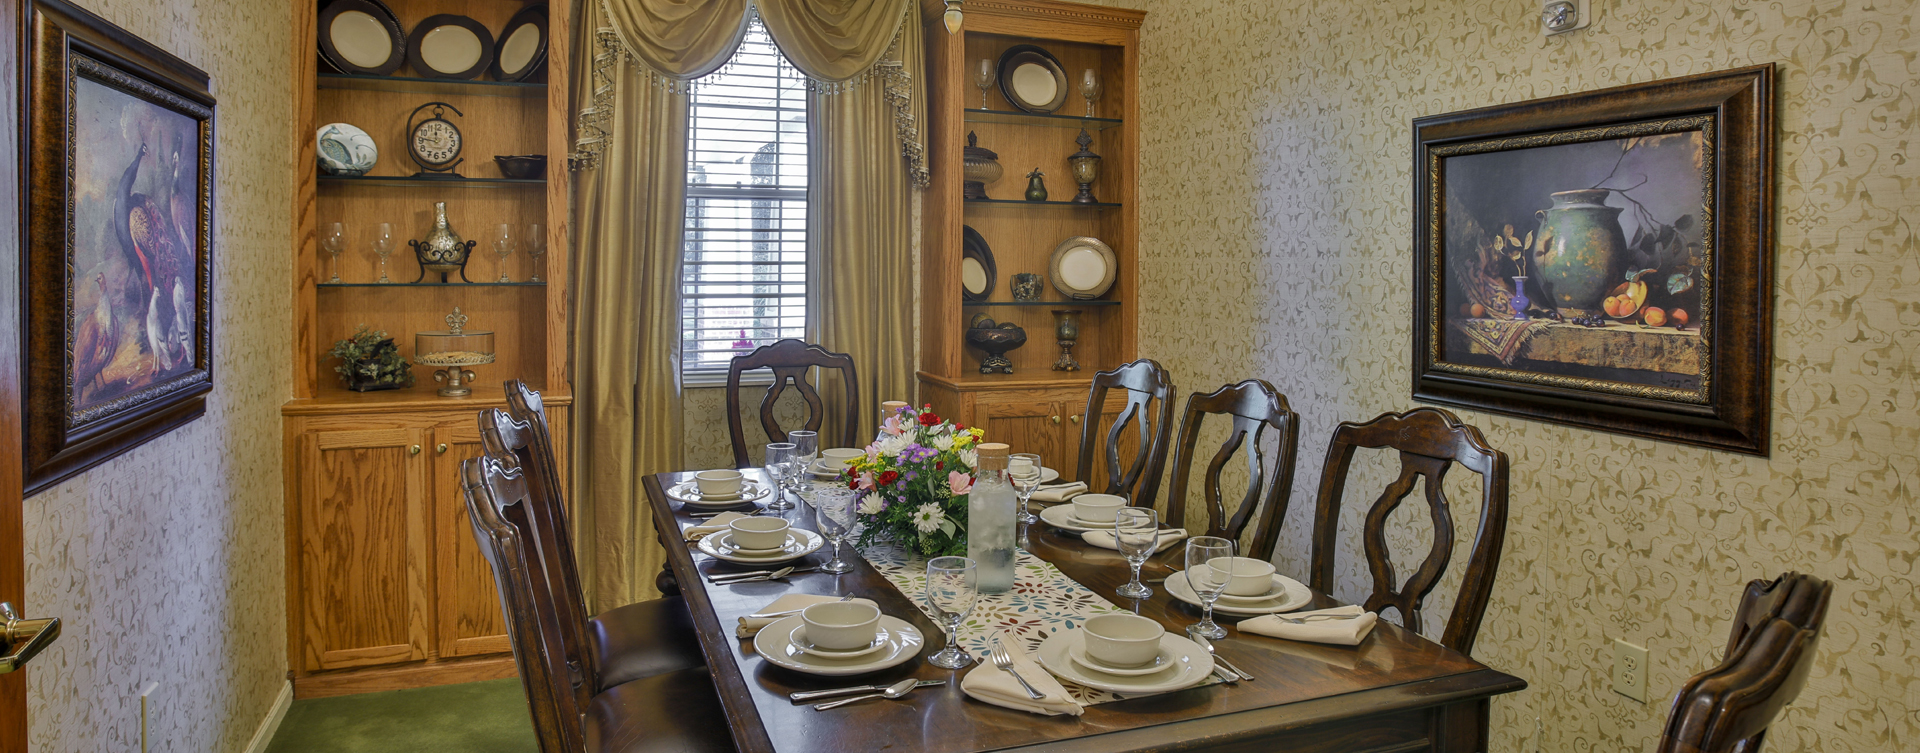 Have fun with themed and holiday meals in the private dining room at Bickford of Crawfordsville